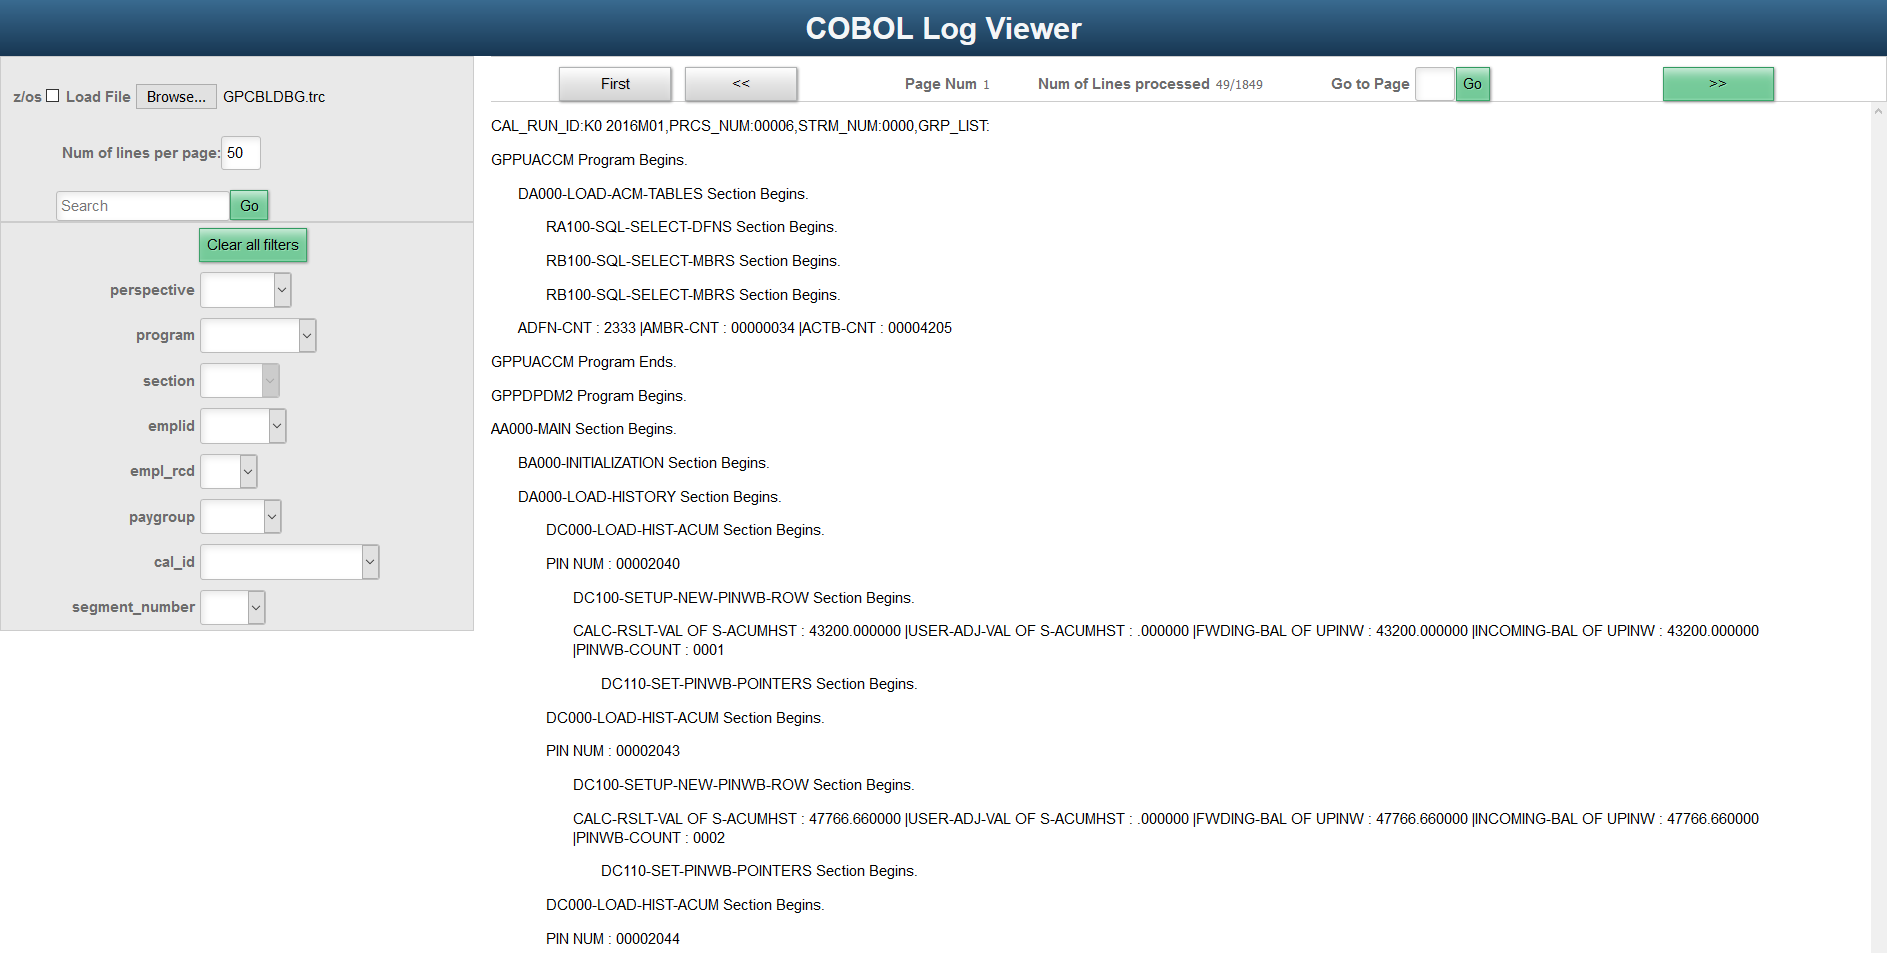 Example of the COBOL Log Viewer